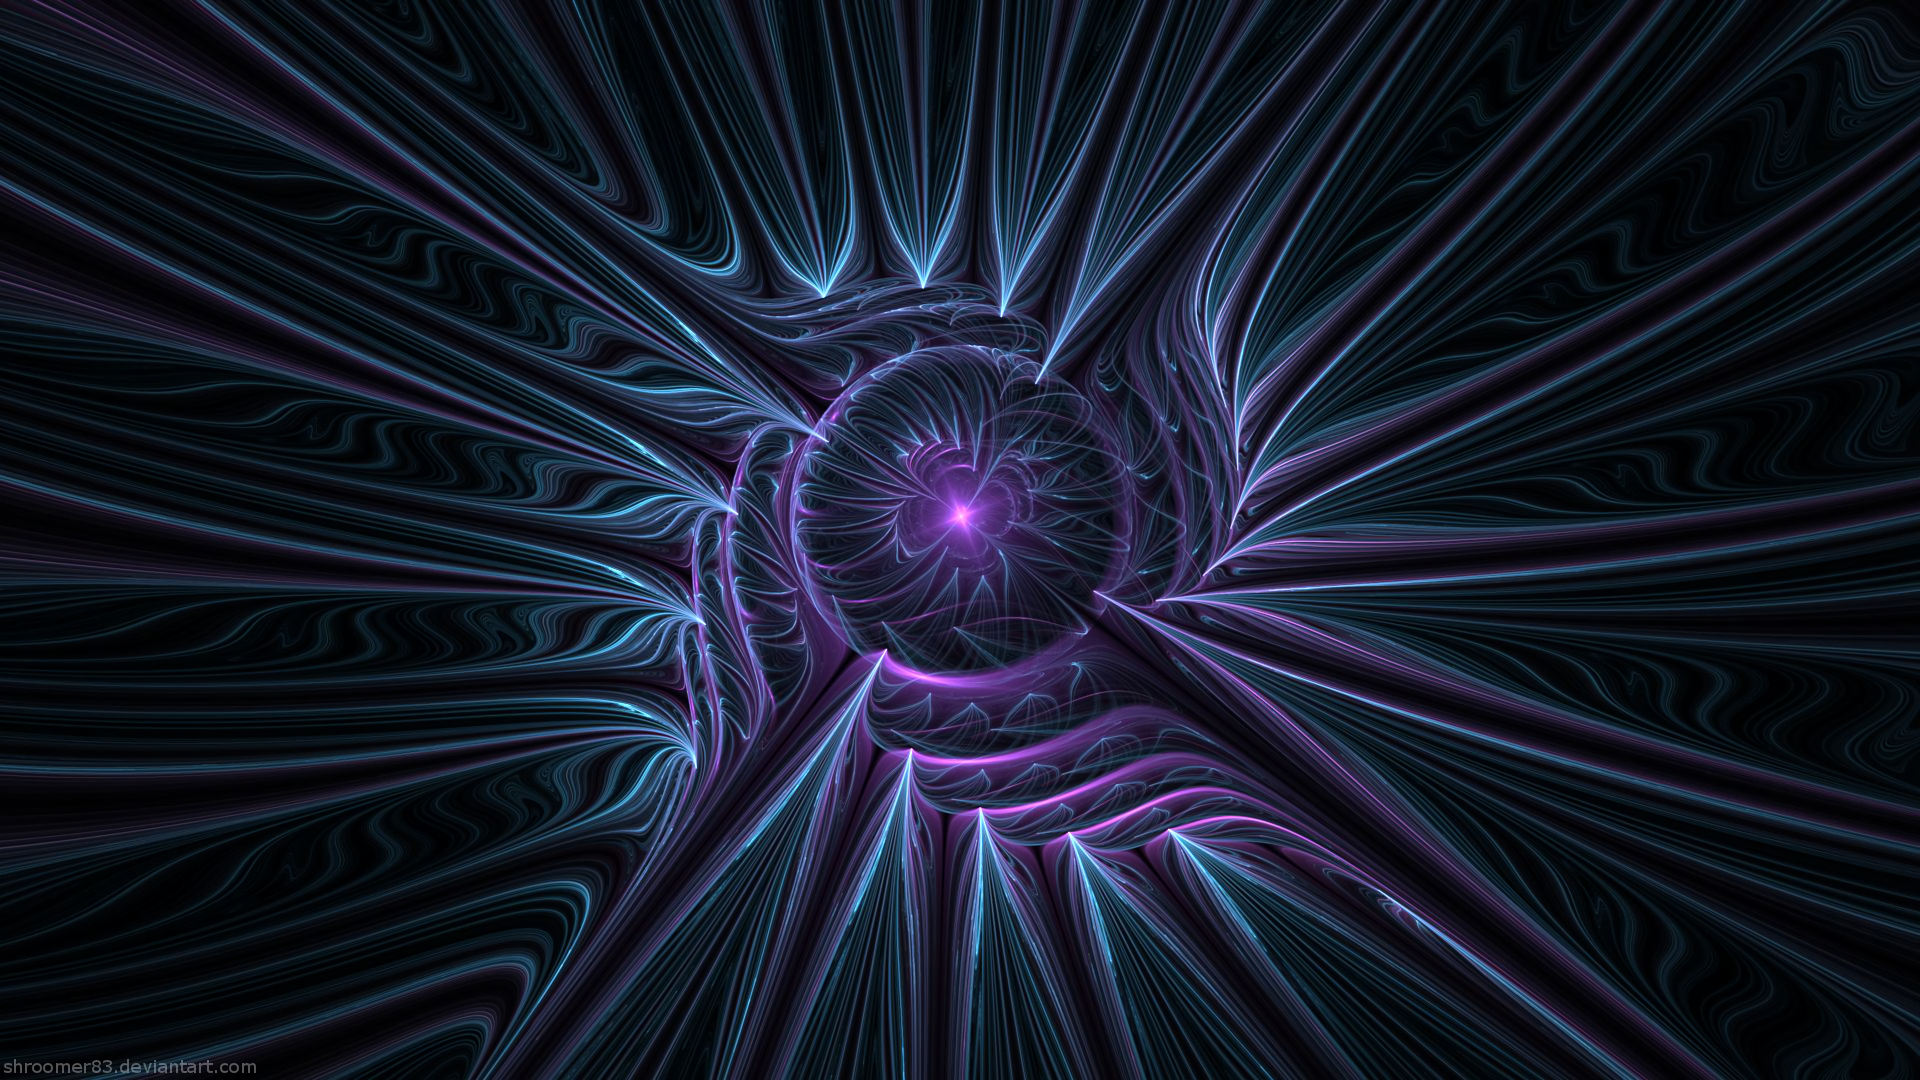 Download Purple Blue Abstract Fractal HD Wallpaper by Shroomer83